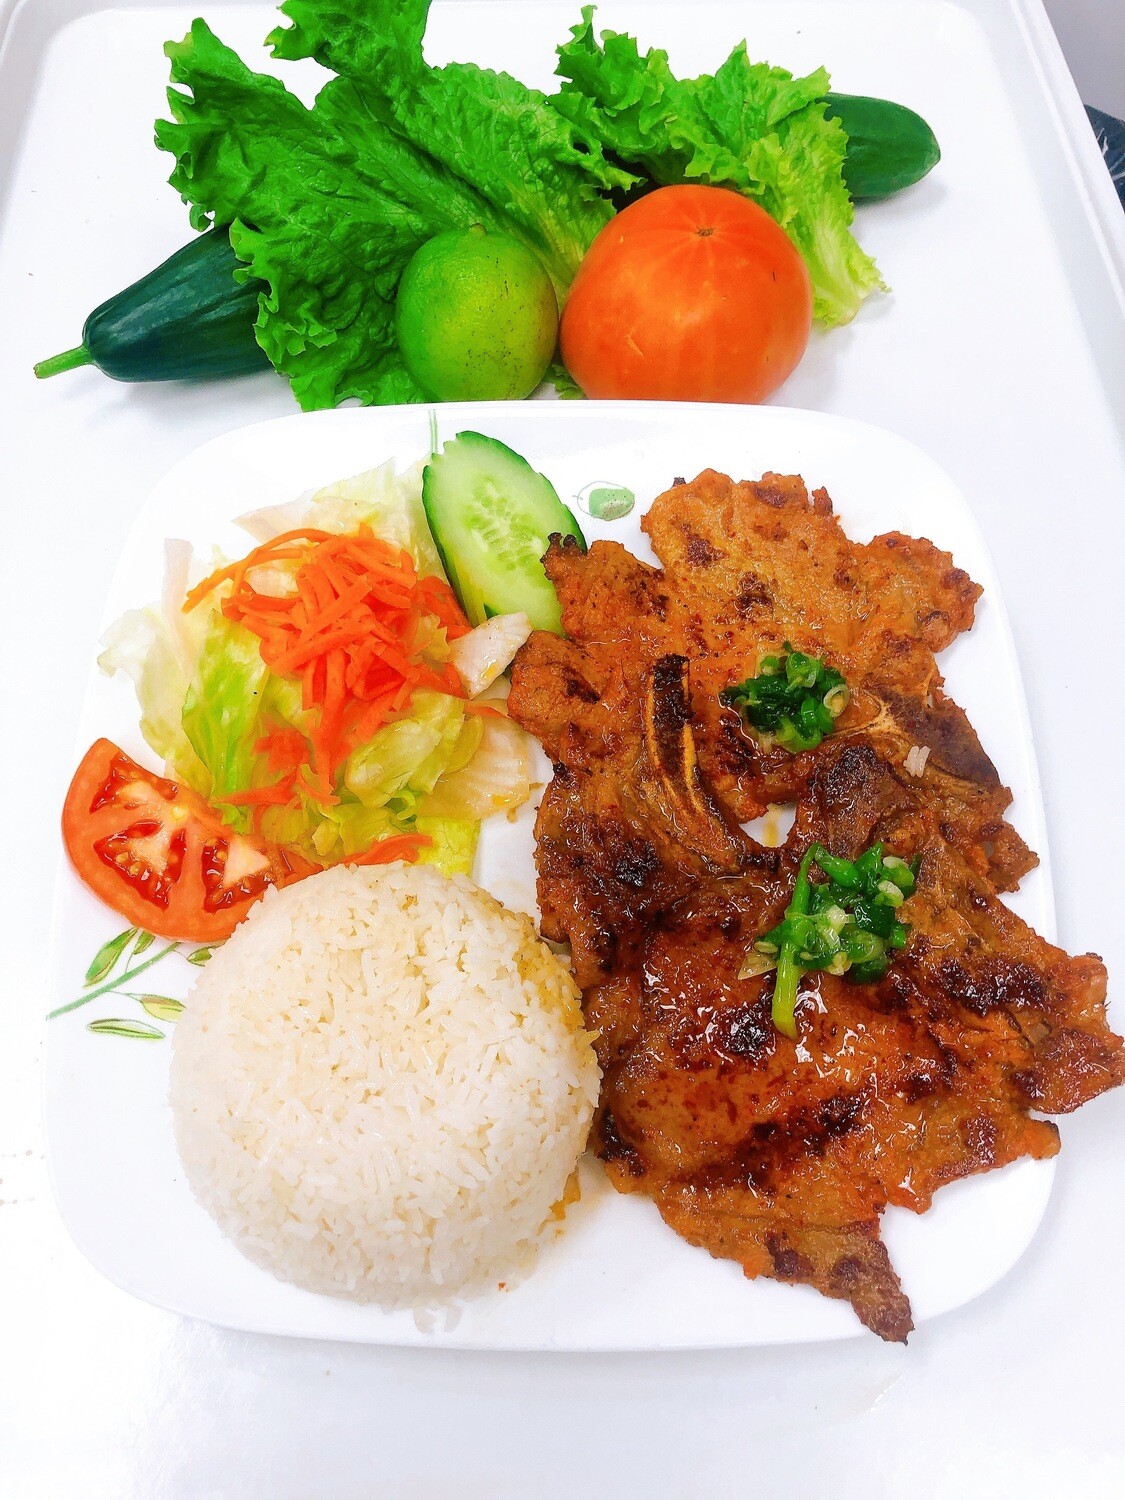 503- Grilled Pork Chop with Steamed Rice (2 pcs)